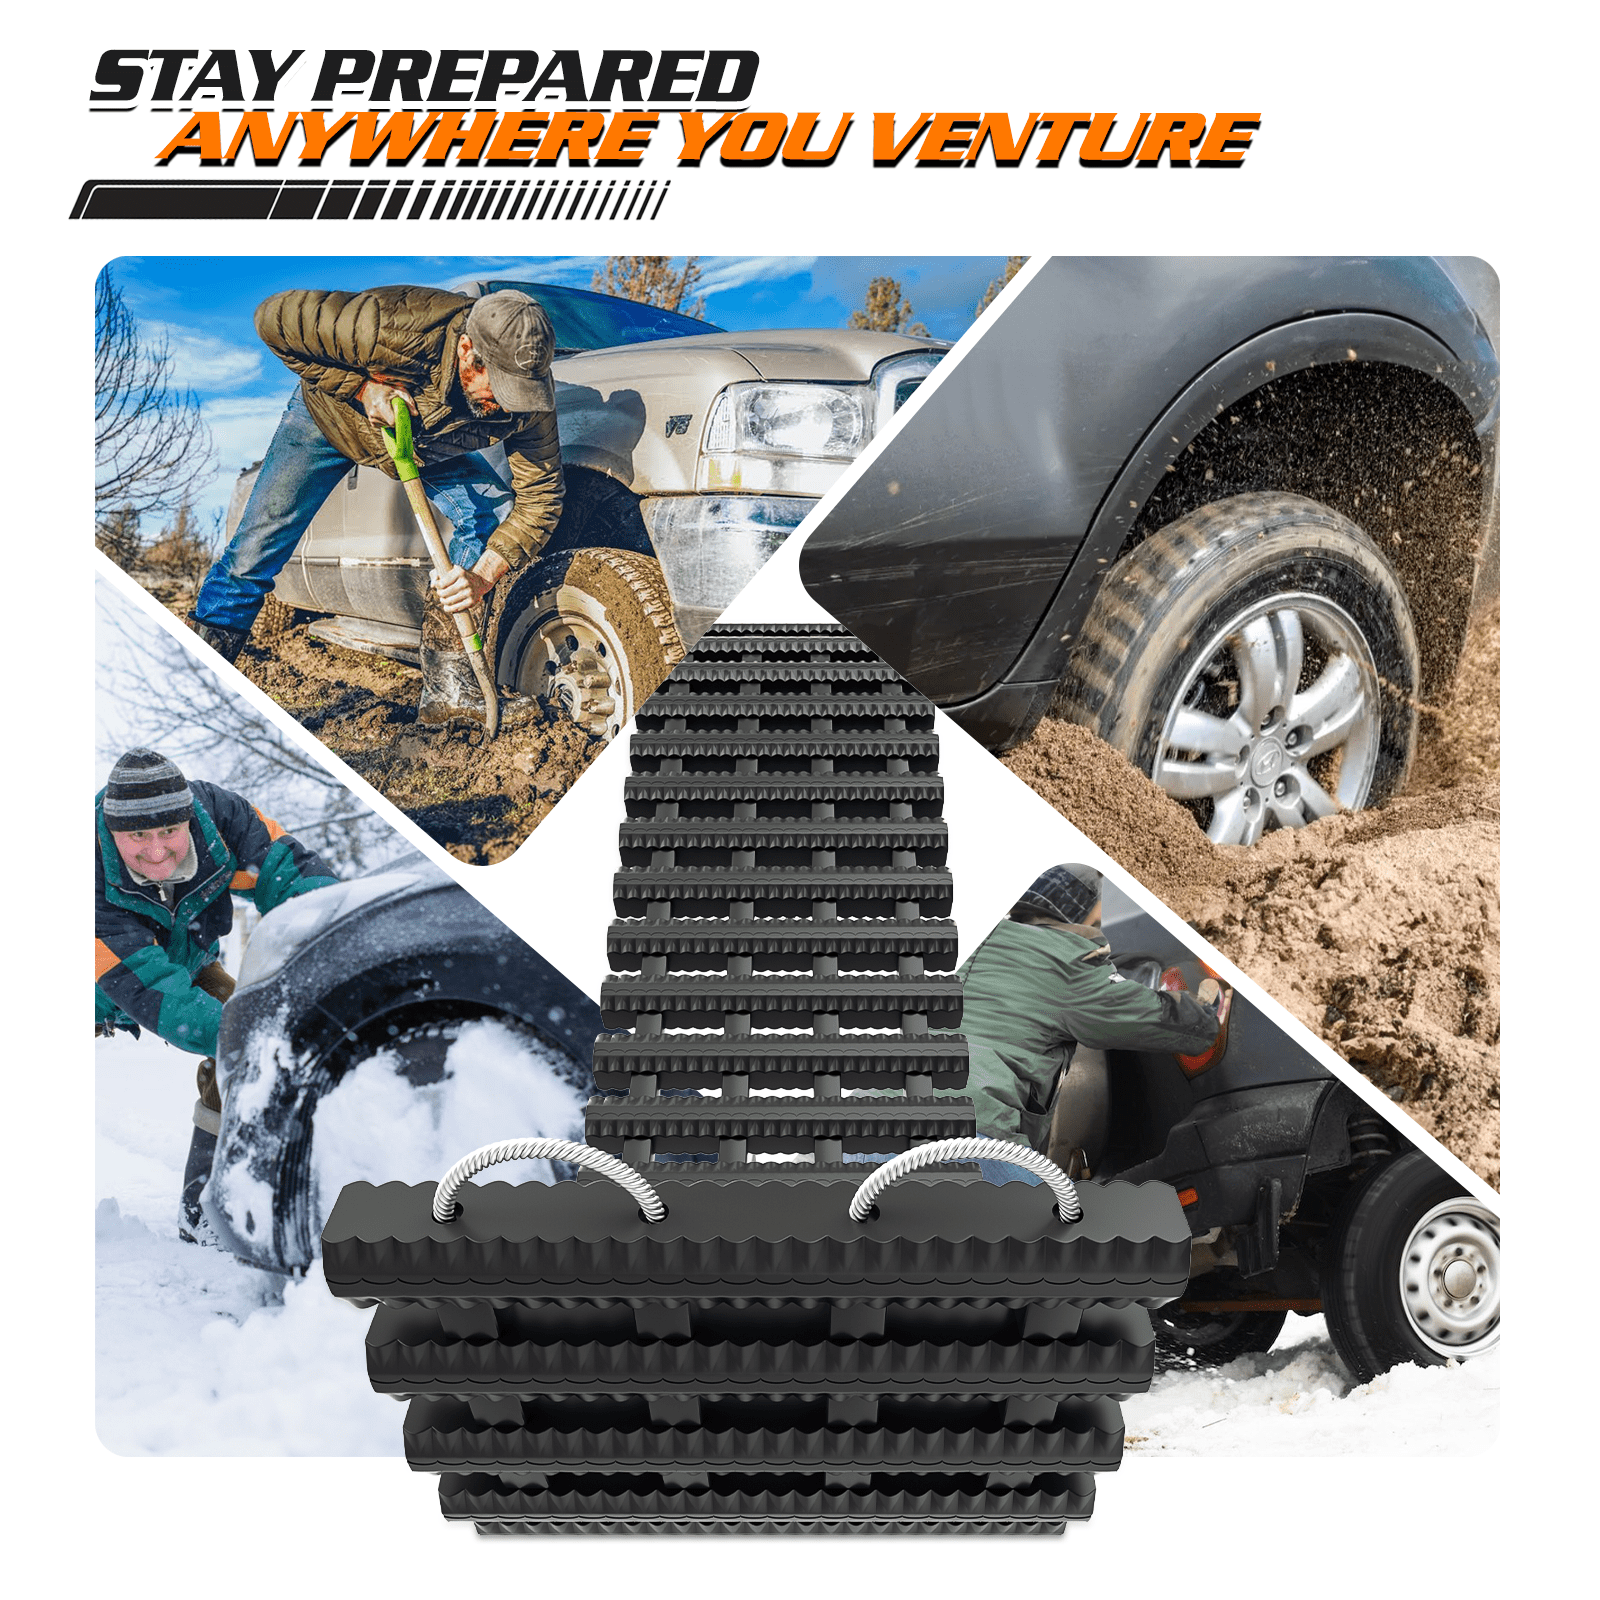 M-AUTO 47 Tire Traction Mat Recovery Track Vehicle Tires Ladder, Emergency  Off Road Traction Tool for Pickups Snow Ice Mud Sand, with Carry Bag, Black  